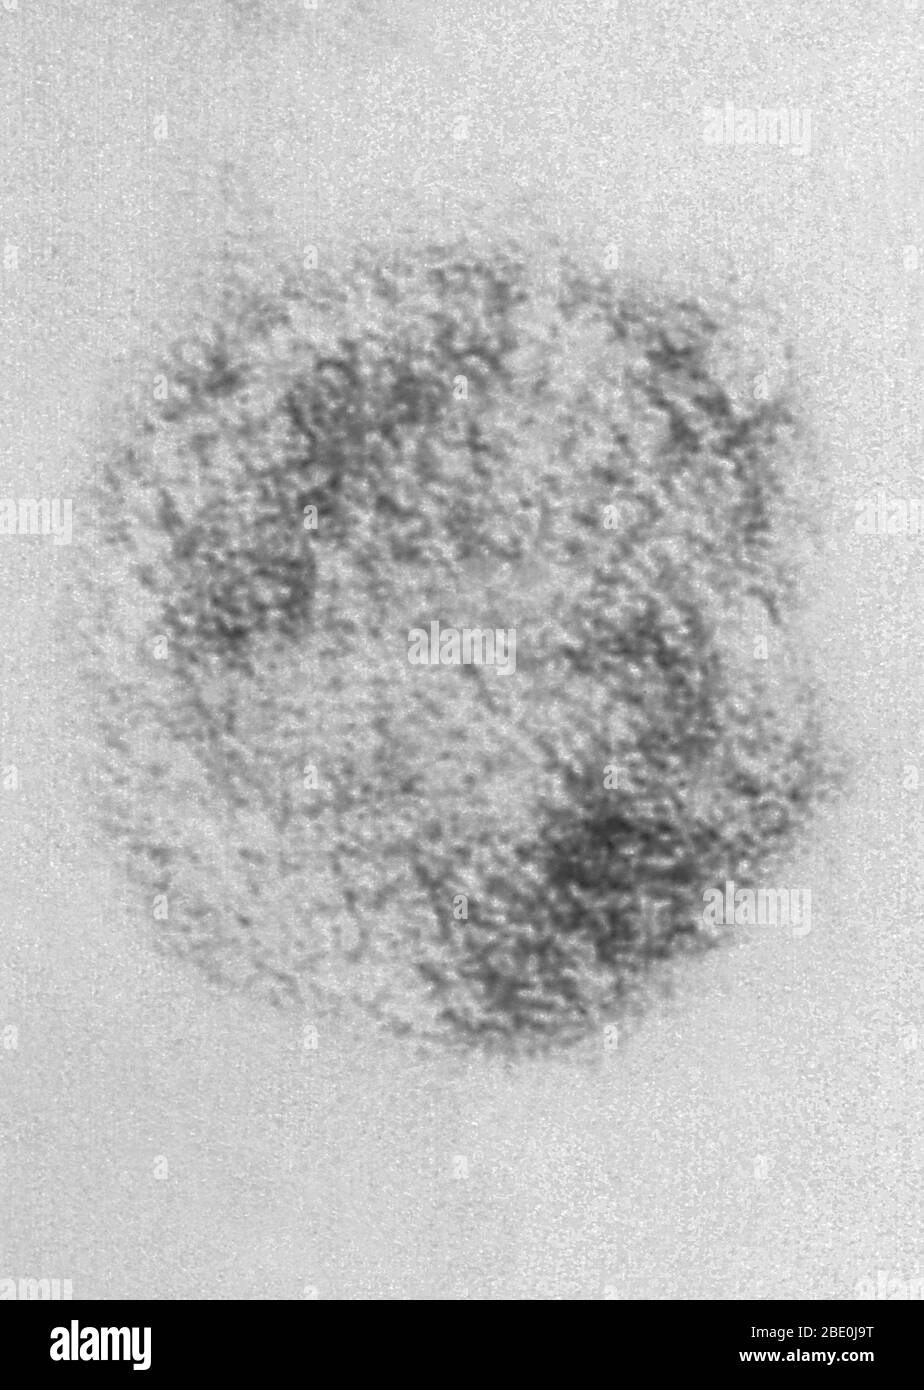 Negative-stained Transmission Electron Micrograph (TEM) depicts Sin Nombre virus (SNV) virions, which are members of the genus Hantavirus, within the family Bunyaviridae. The Sin Nombre virus is the cause of hantavirus cardiopulmonary syndrome (HCPS), also referred to as hantavirus pulmonary syndrome (HPS), in humans. In November 1993, the specific hantavirus that caused the Four Corners outbreak was isolated. Using tissue from a deer mouse that had been trapped near the New Mexico home of a person who had gotten the disease, the Special Pathogens Branch at CDC grew the virus in the laboratory Stock Photo